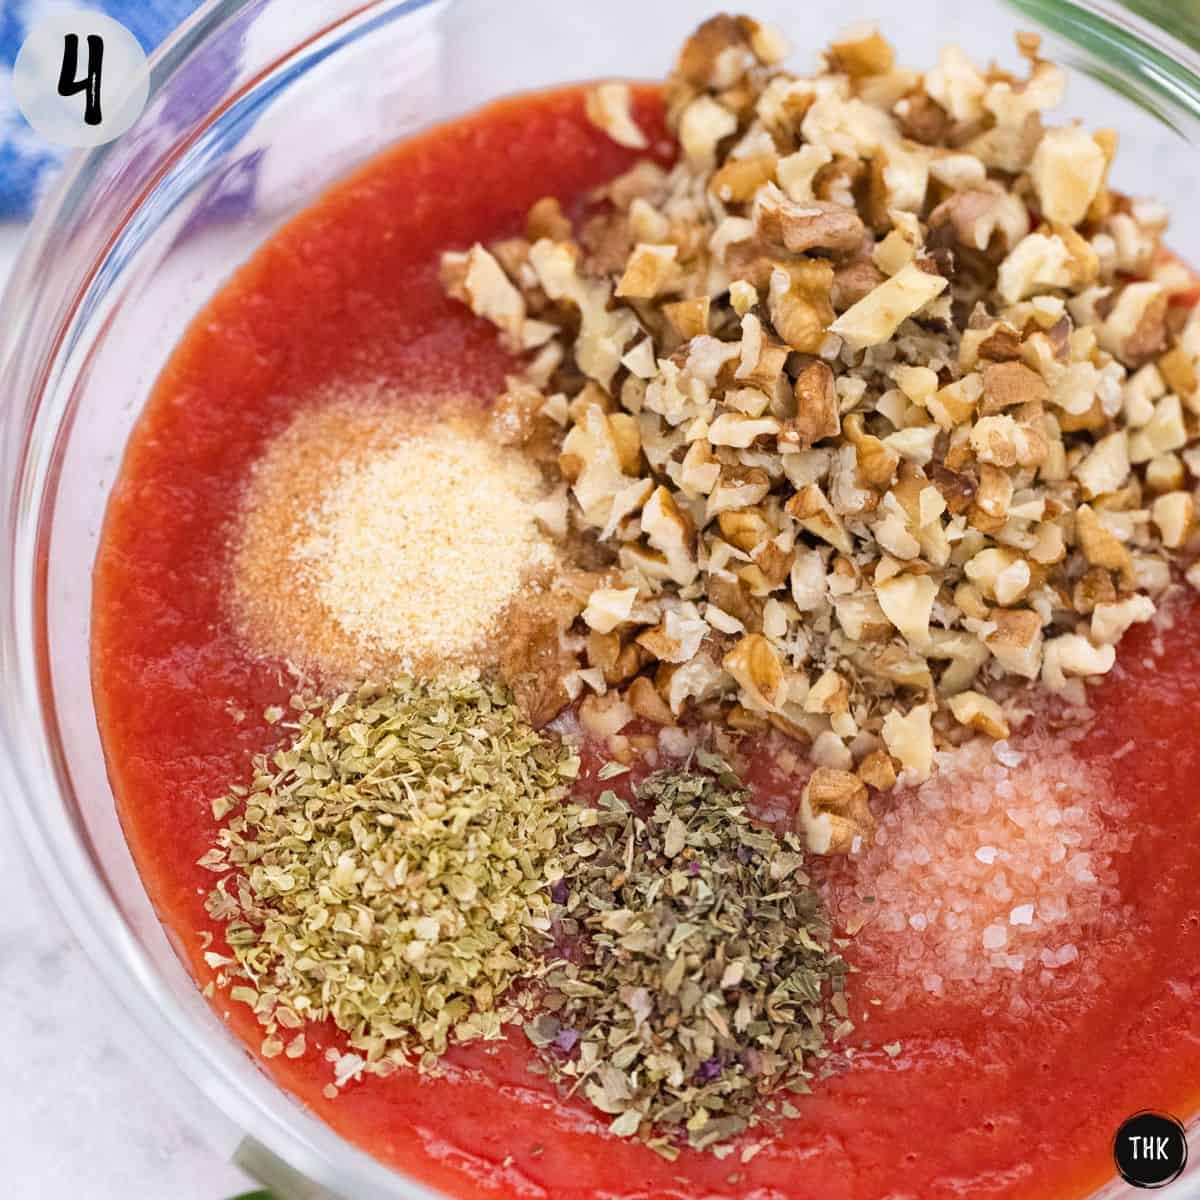 Tomato sauce, spices and chopped walnuts inside glass bowl.